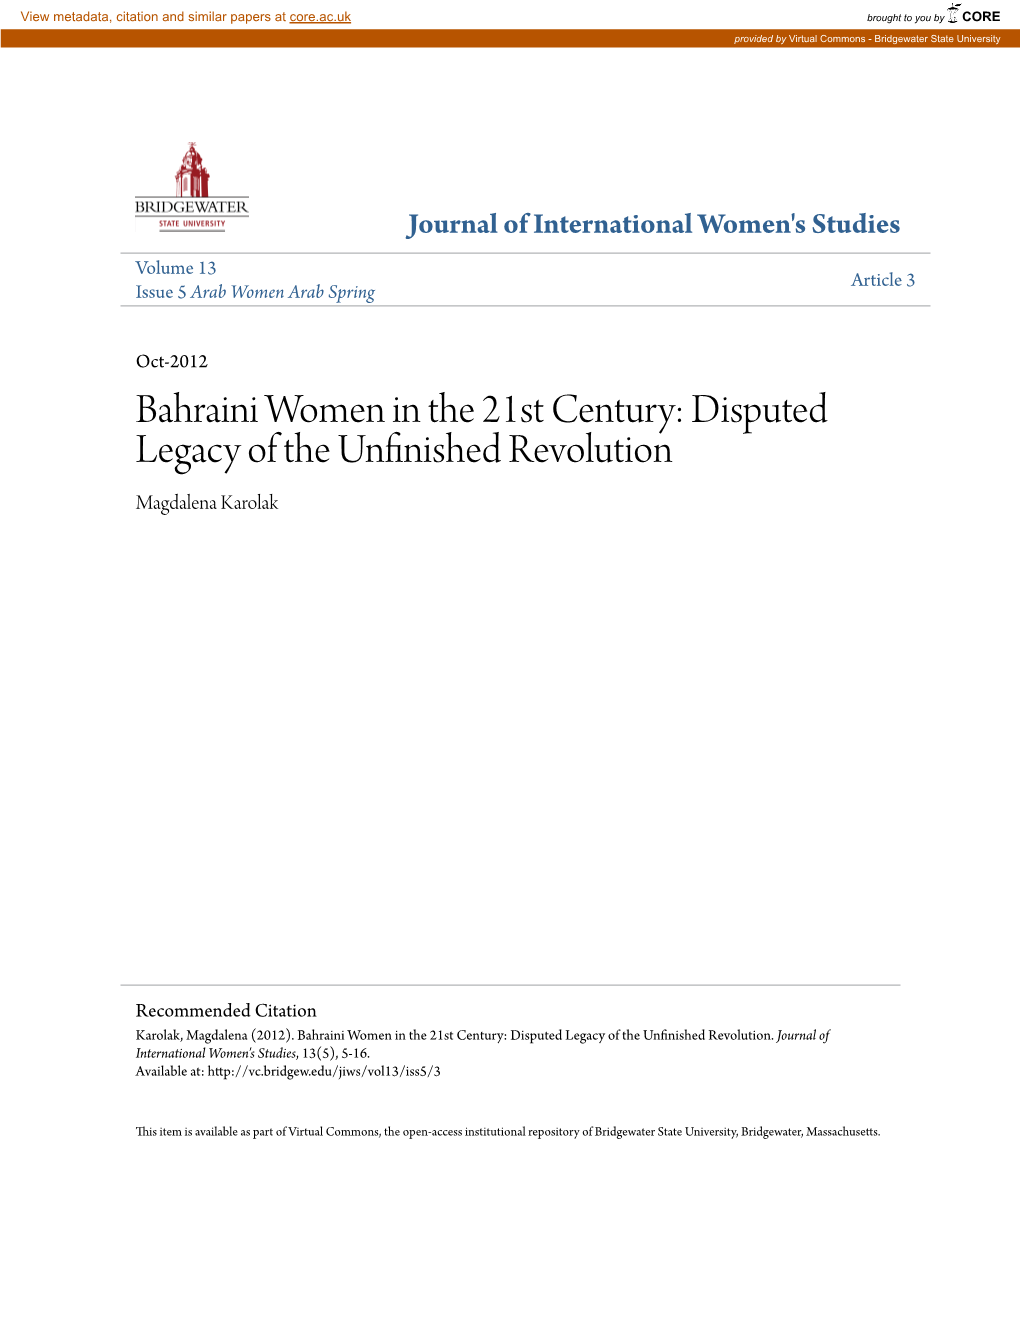 Bahraini Women in the 21St Century: Disputed Legacy of the Unfinished Revolution Magdalena Karolak